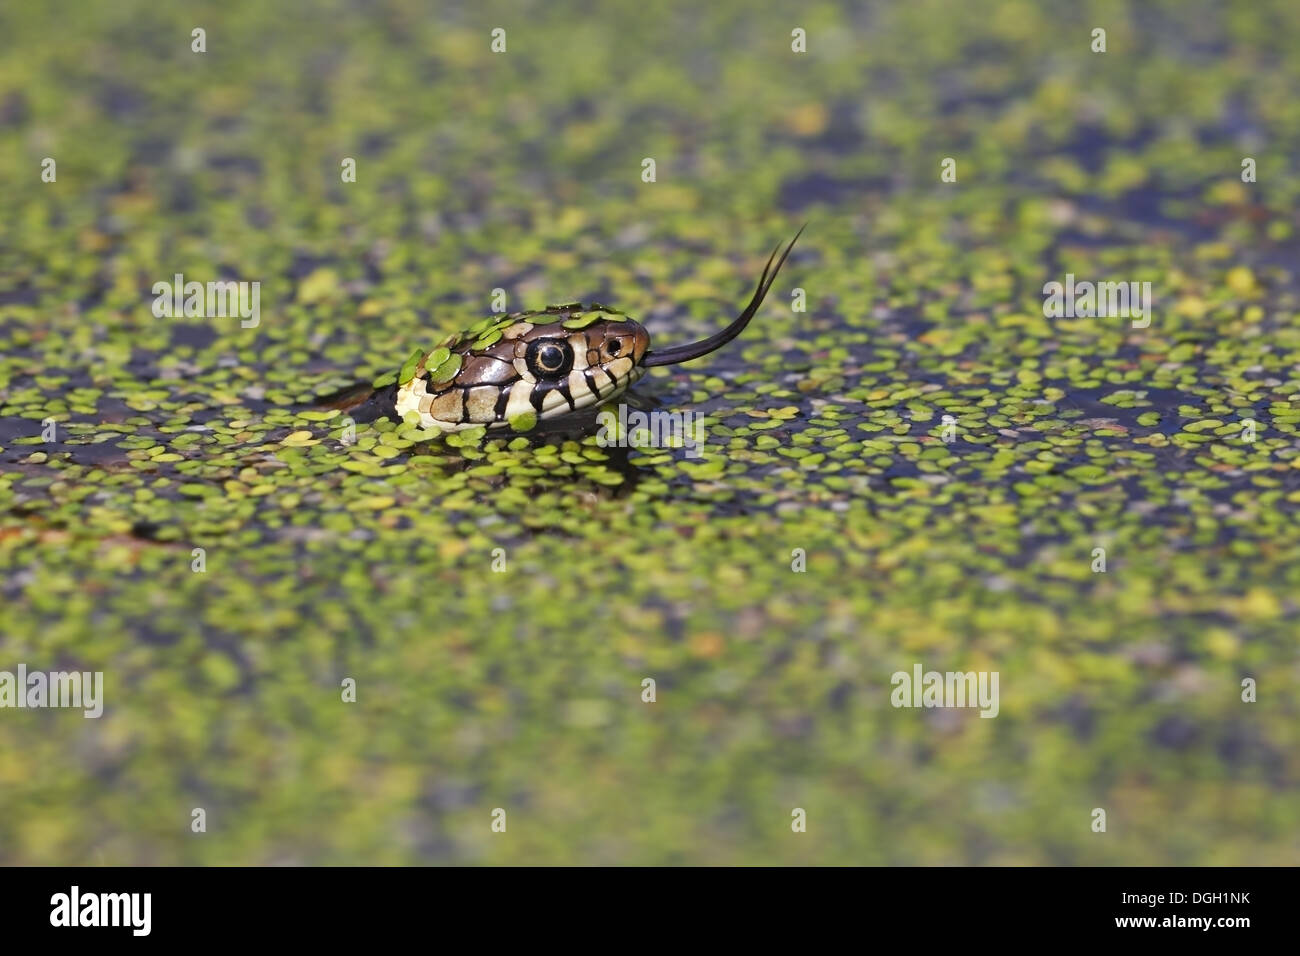 Grass Snake (Natrix natrix) adult, flicking forked tongue, swimming in water amongst duckweed, Arne, Dorset, England, May Stock Photo